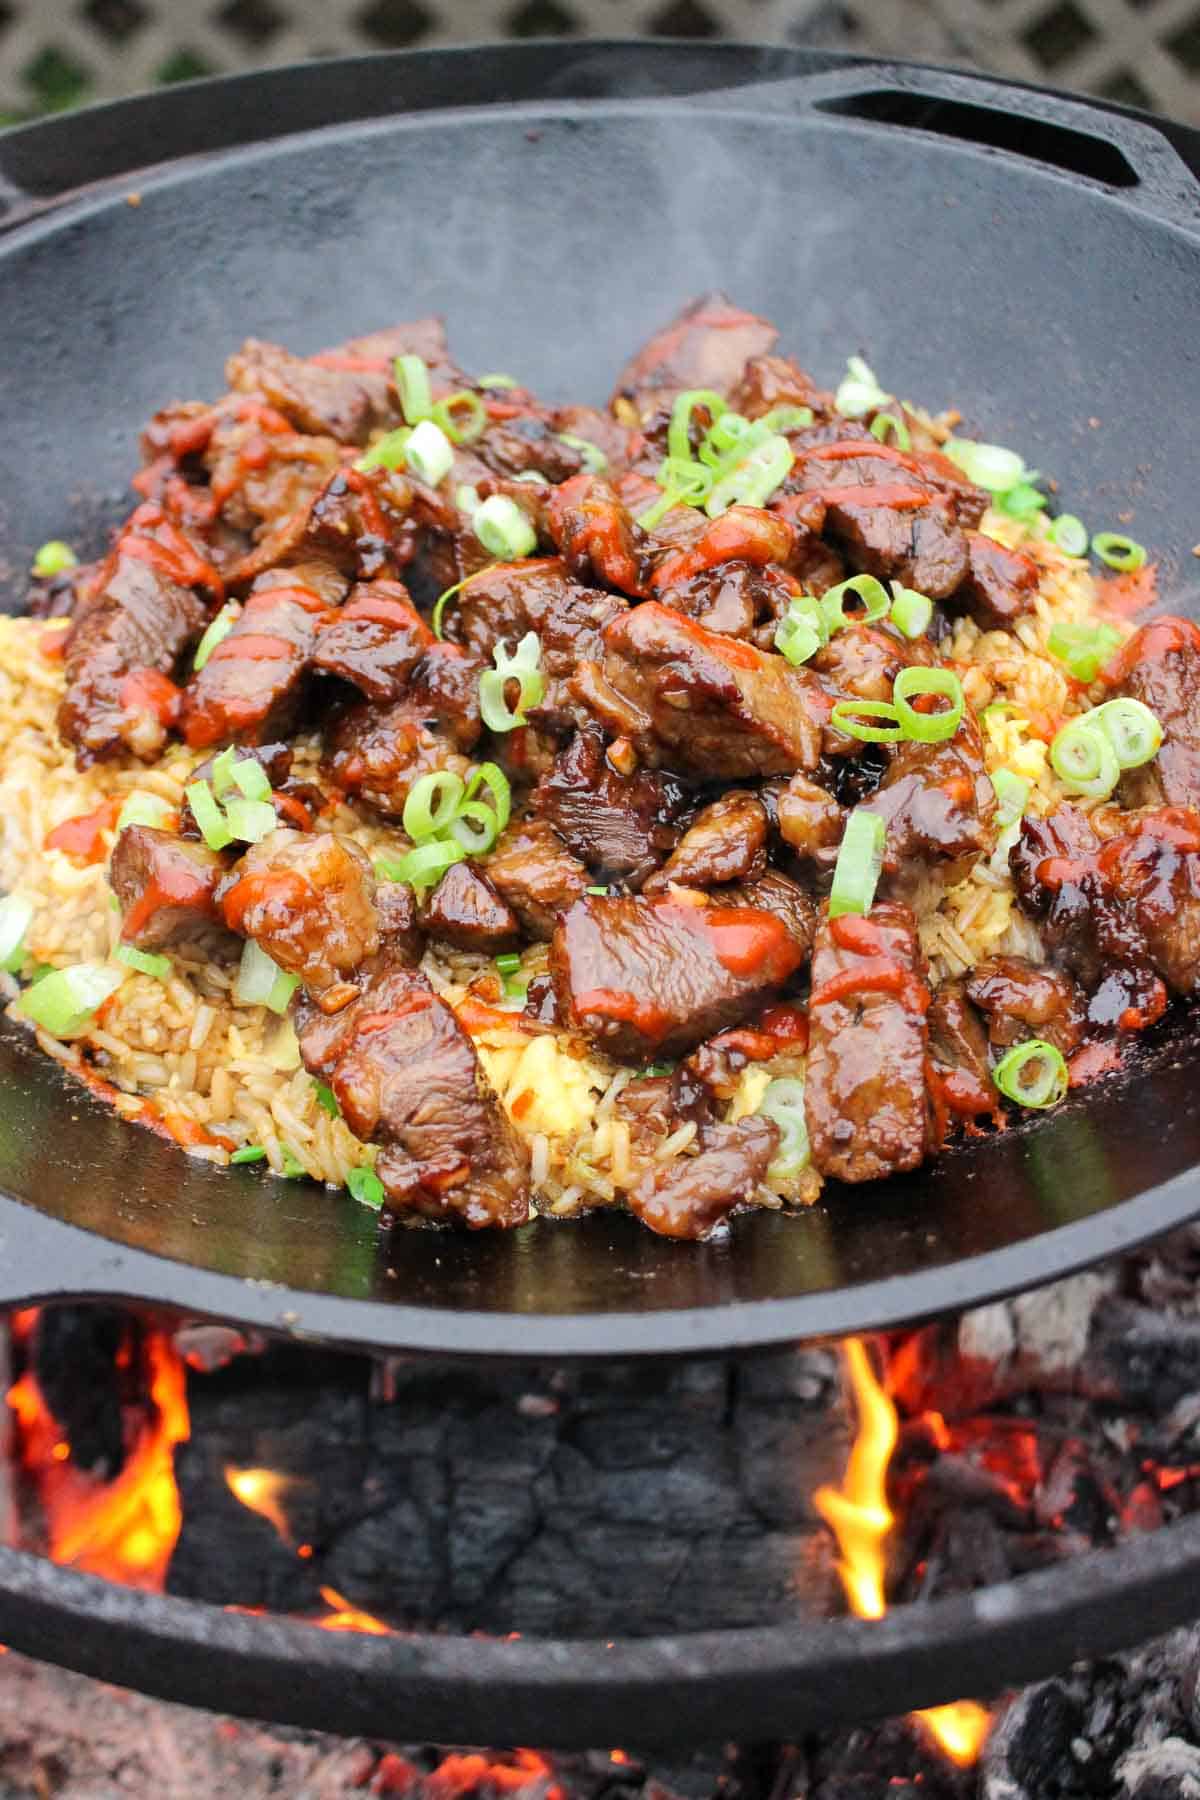 Garlic Teriyaki Steak Bites over a bed of fried rice sitting in the wok over the fire.